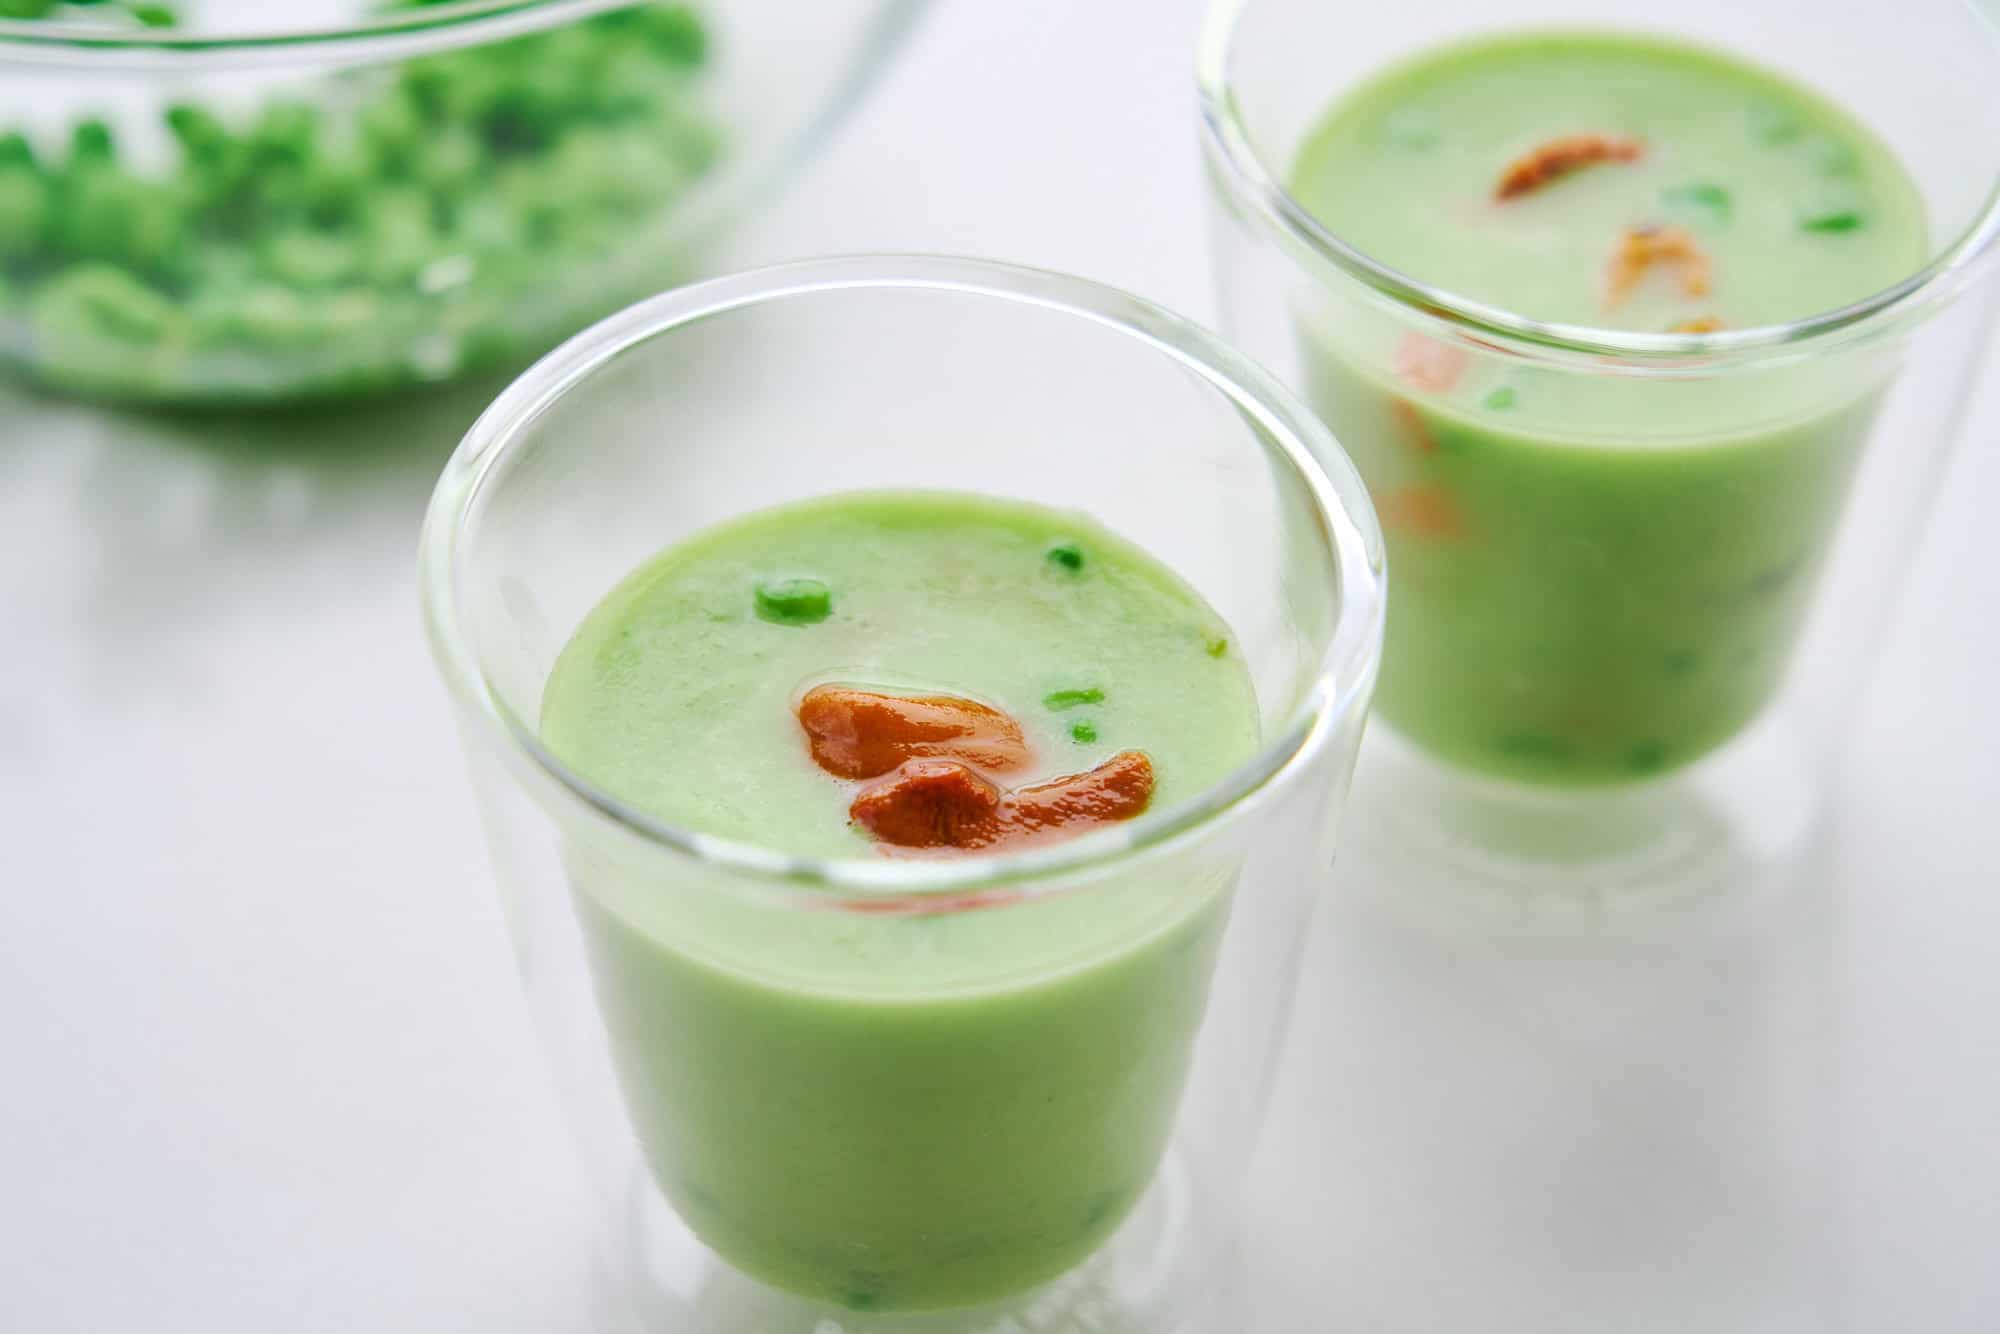 Uni bejewels a cup of chilled pea soup.